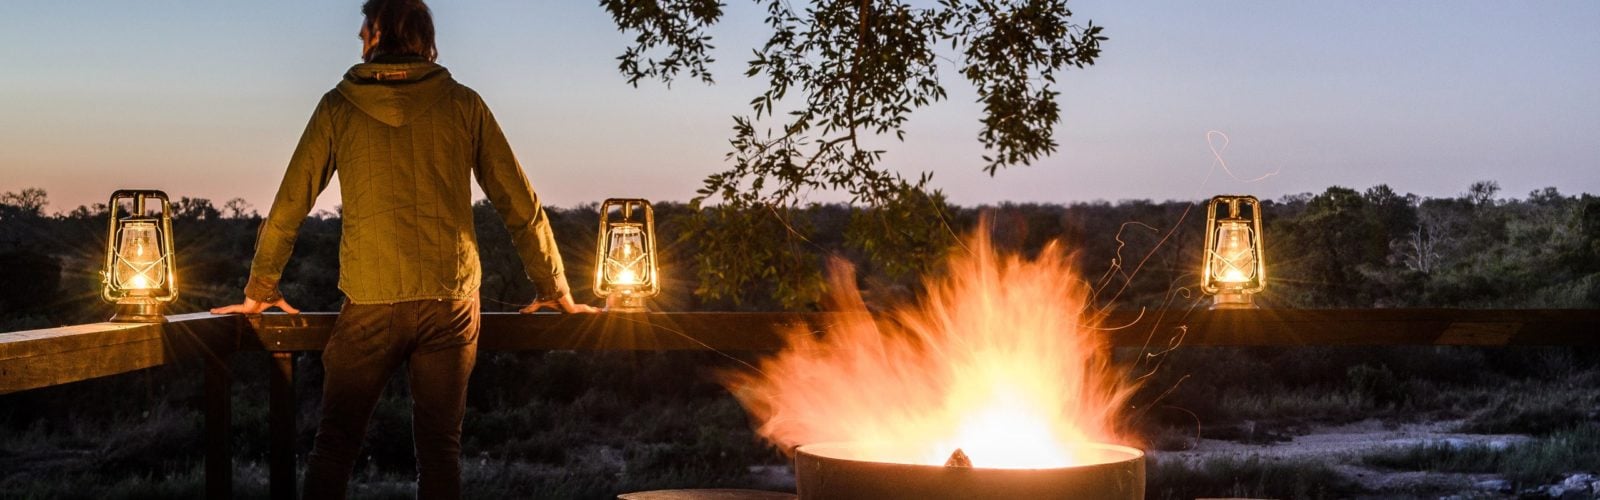 Exterior with camp fire in the evening at Singita Boulders Lodge, Sabi Sands, South Africa